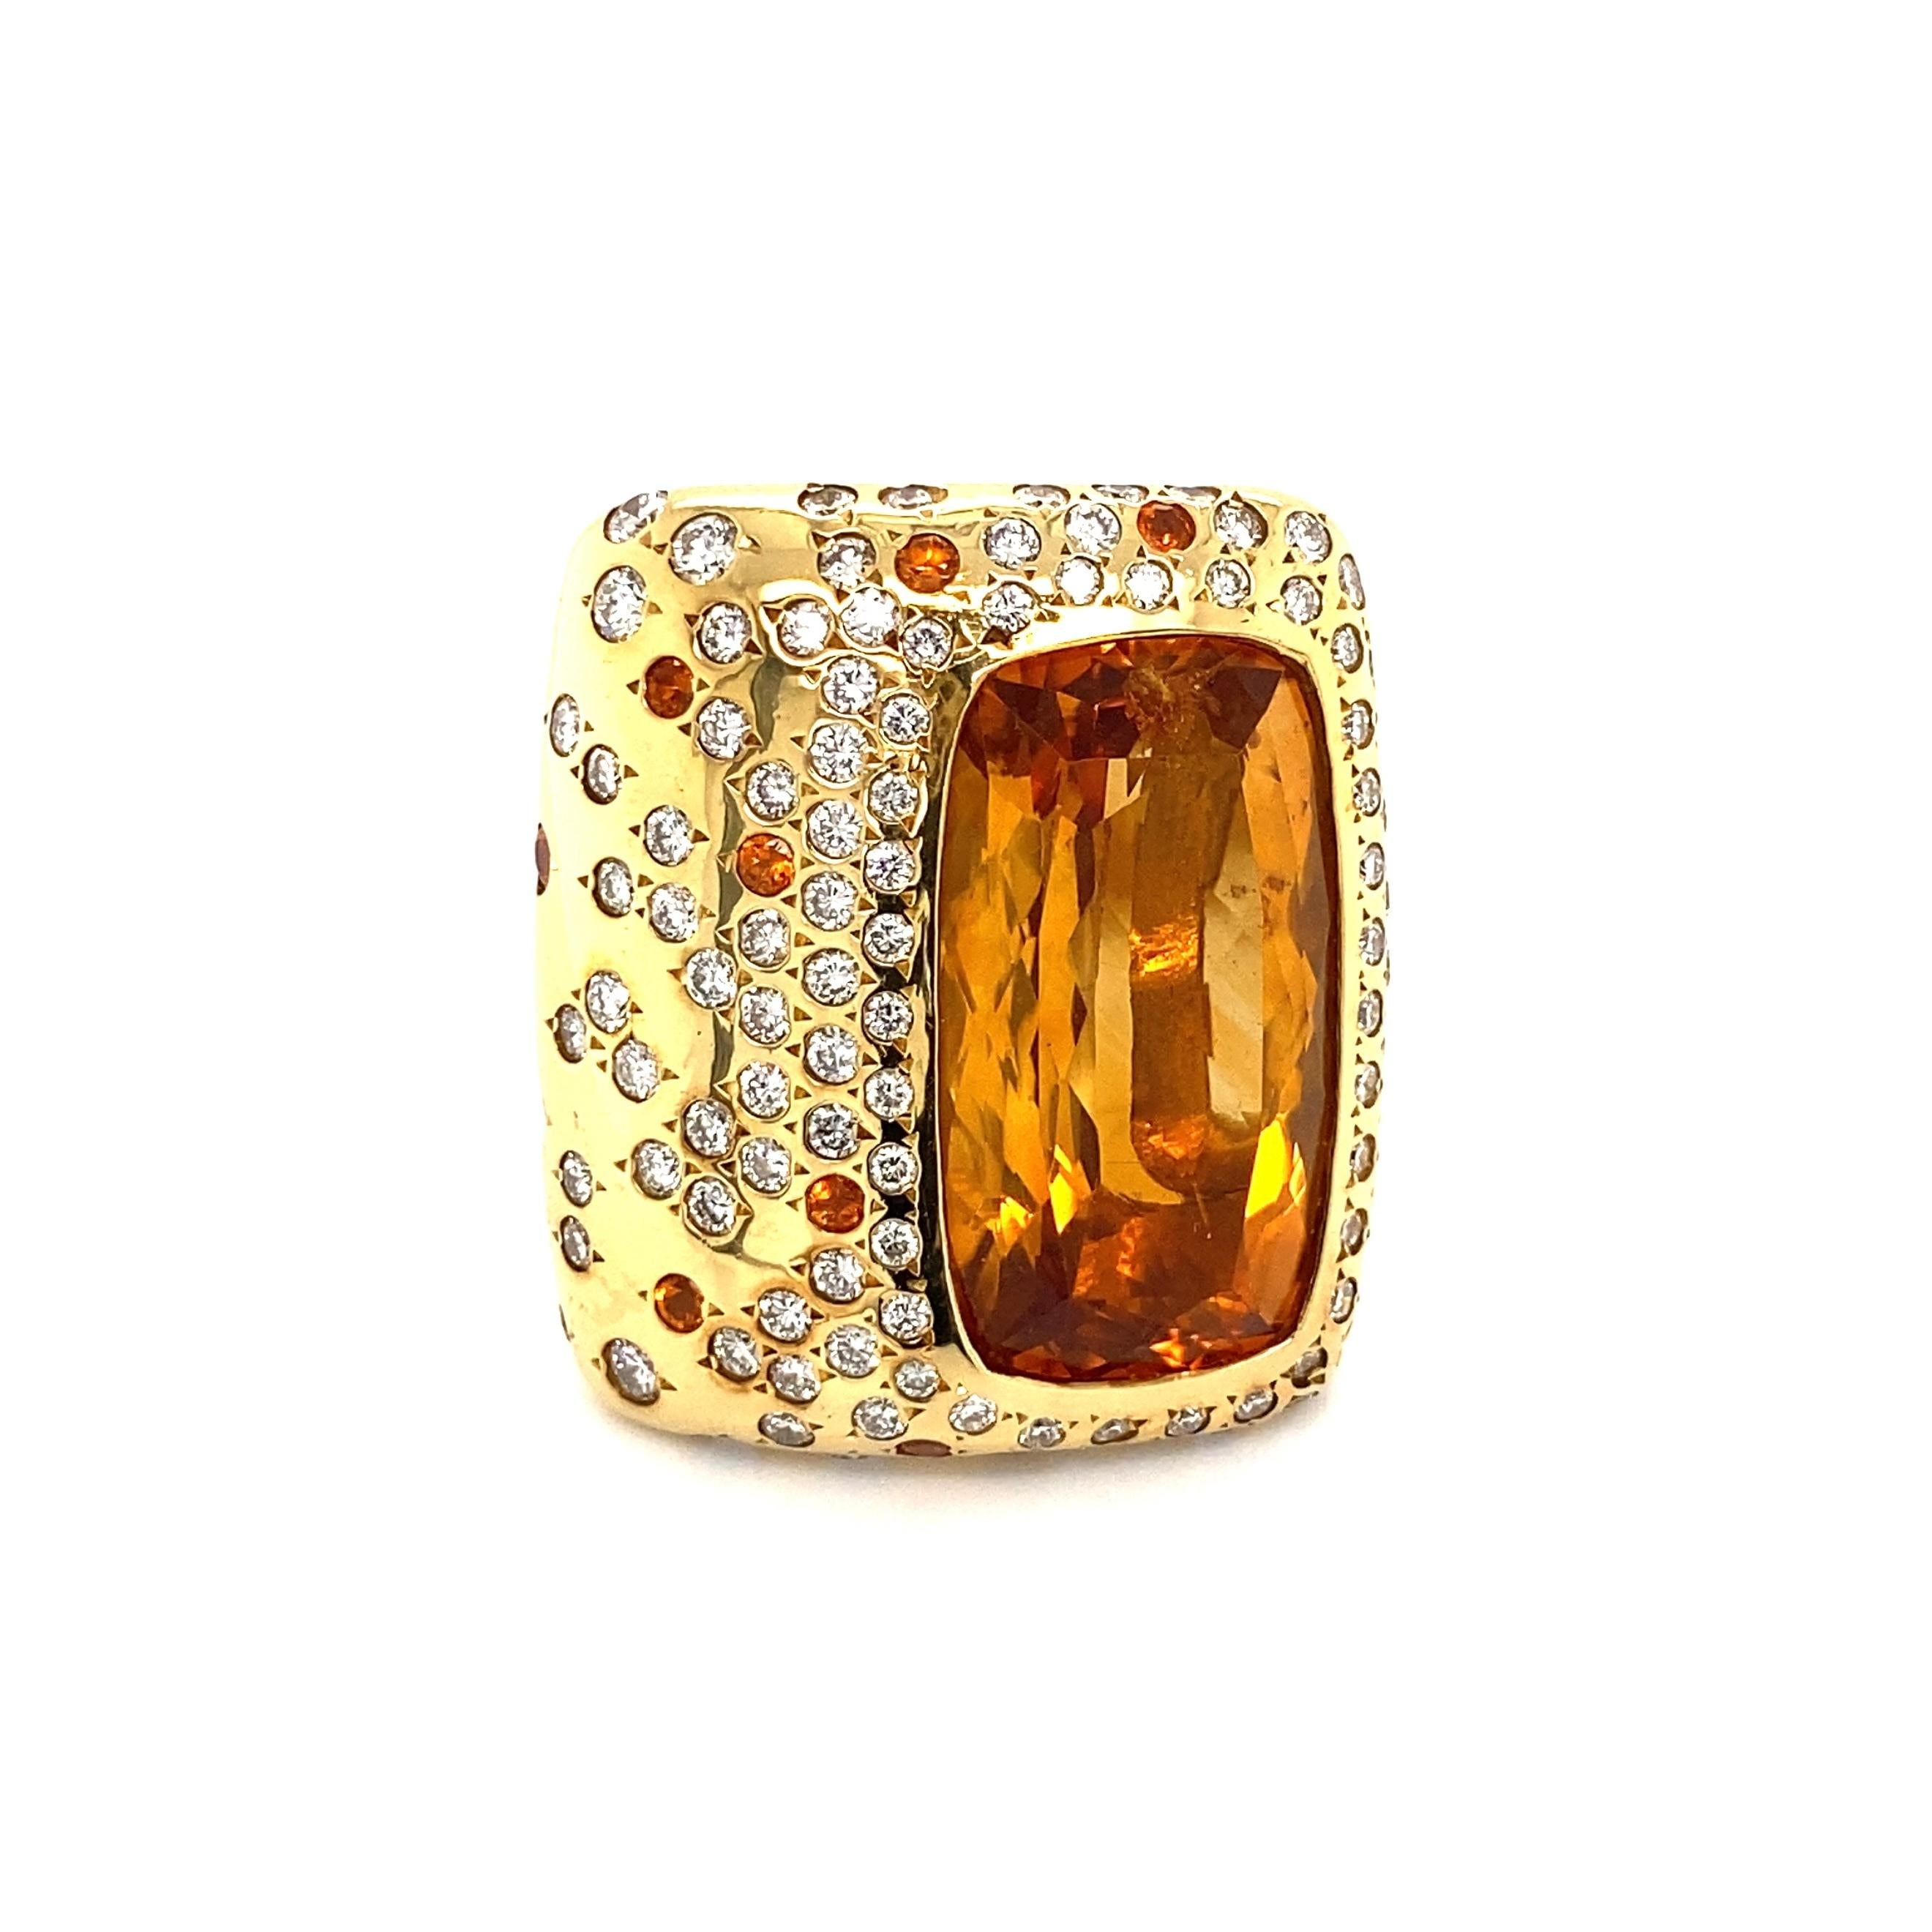 13.50 Carat Citrine Diamond and Spessartite Garnet Gold Ring Estate Fine Jewelry In Excellent Condition For Sale In Montreal, QC